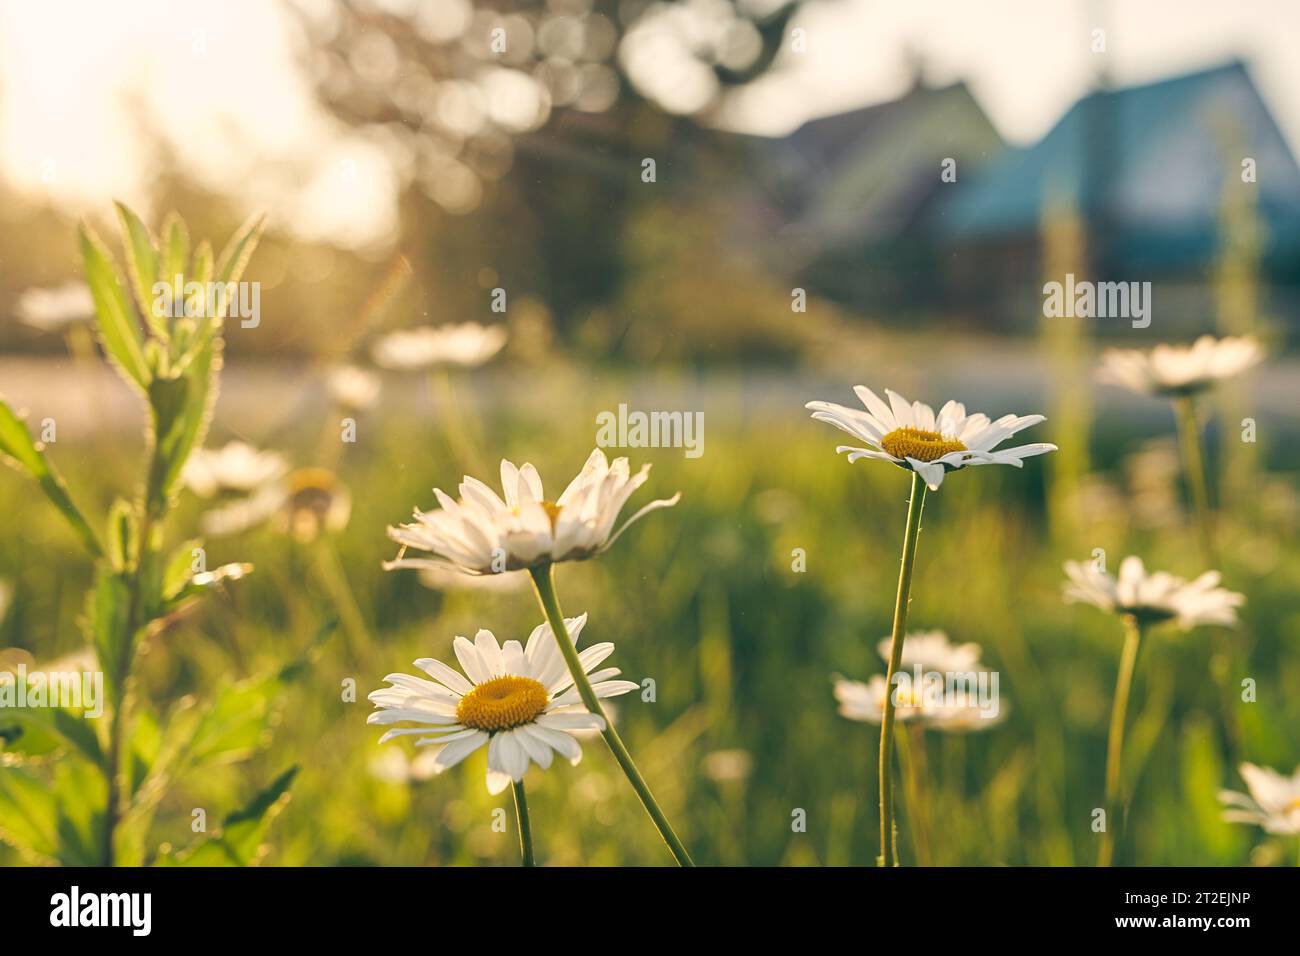 Chamomile on the background of wooden blurred houses. A beautiful picture of nature with a blooming chamomile. Chamomile spring floral sky landscape. Summer daisy. High quality photo Stock Photo